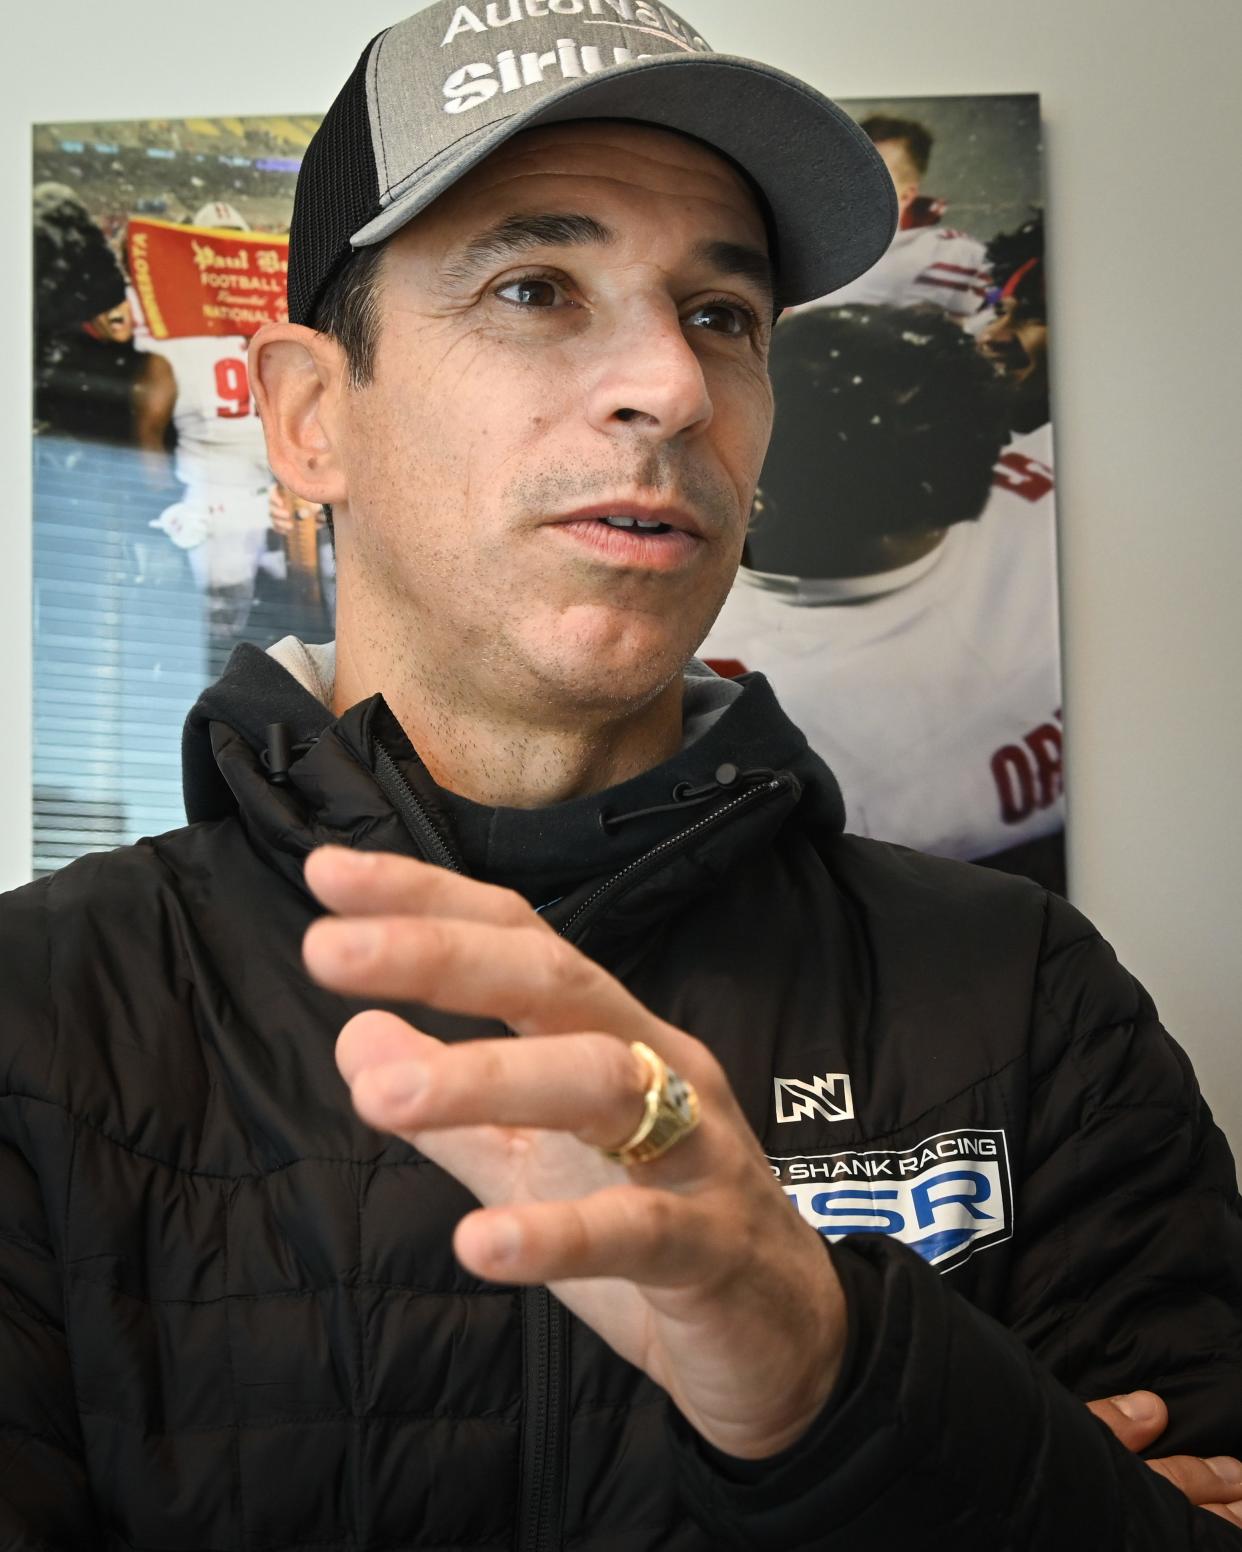 Four-time Indianapolis 500 winner Helio Castroneves was in Milwaukee Wednesday and Thursday to take part in the title sponsorship announcement for the return of of IndyCar to the Milwaukee Mile with the Hy-Vee 250s Aug. 31 and Sept. 1.